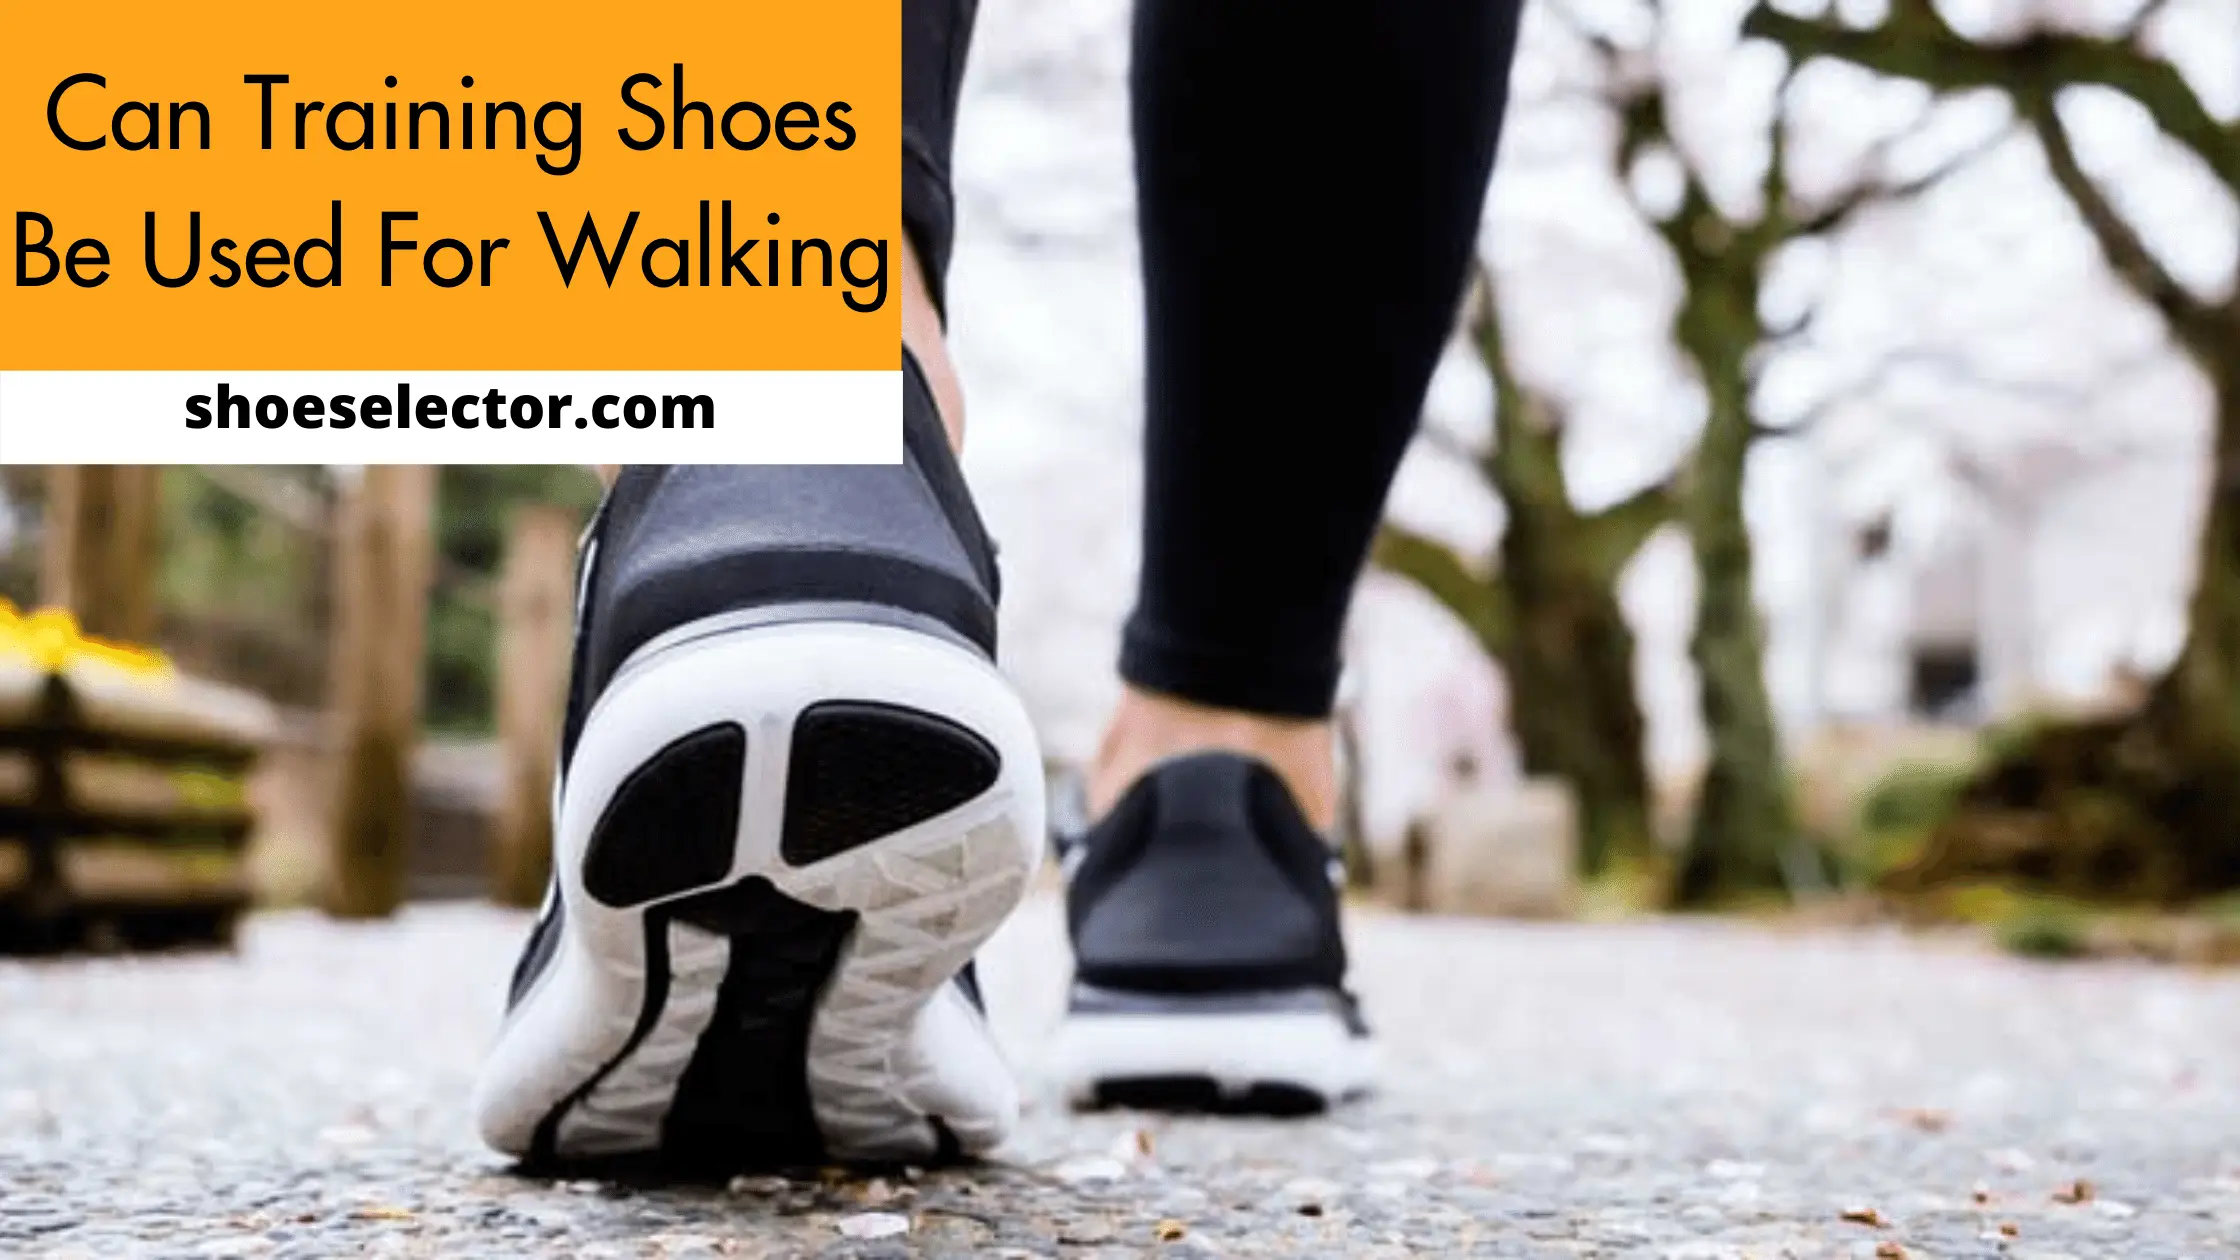 Can Training Shoes Be Used For Walking? - Simple Guide